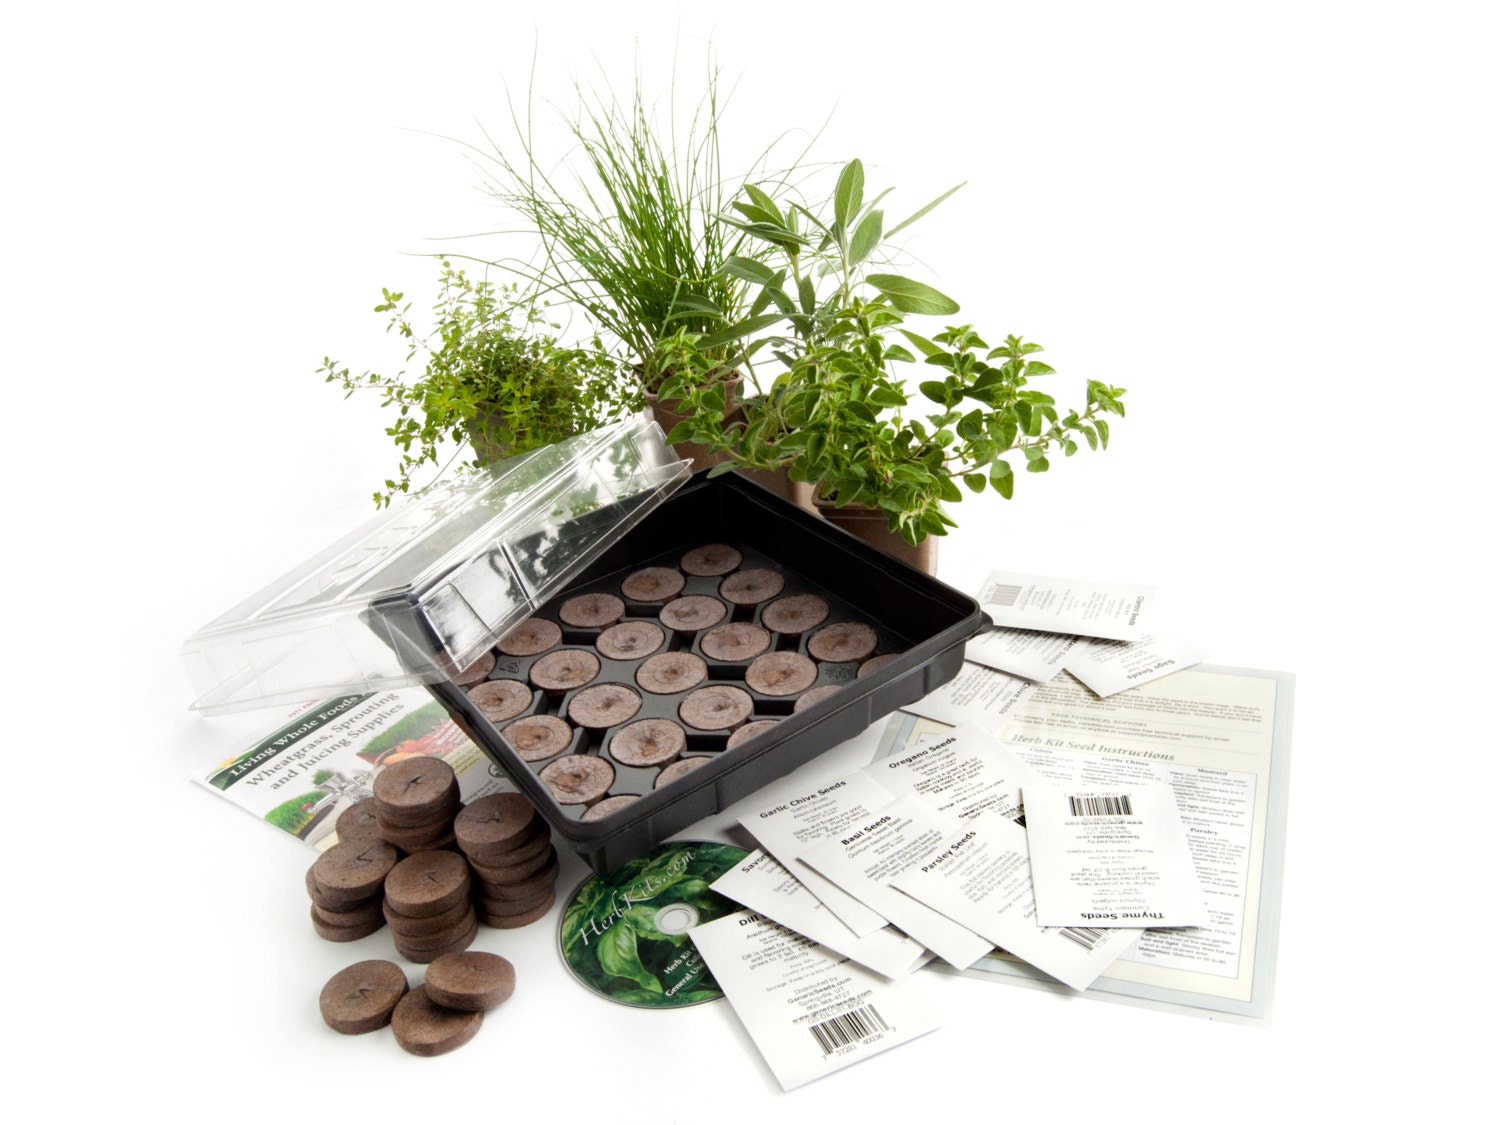 Culinary Indoor Herb Garden Starter Kit - Grow Basil, Dill, Cilantro, Marjoram, Parsley, Sage, Chives, Savory & More - Great Gift Idea - HandyPantry